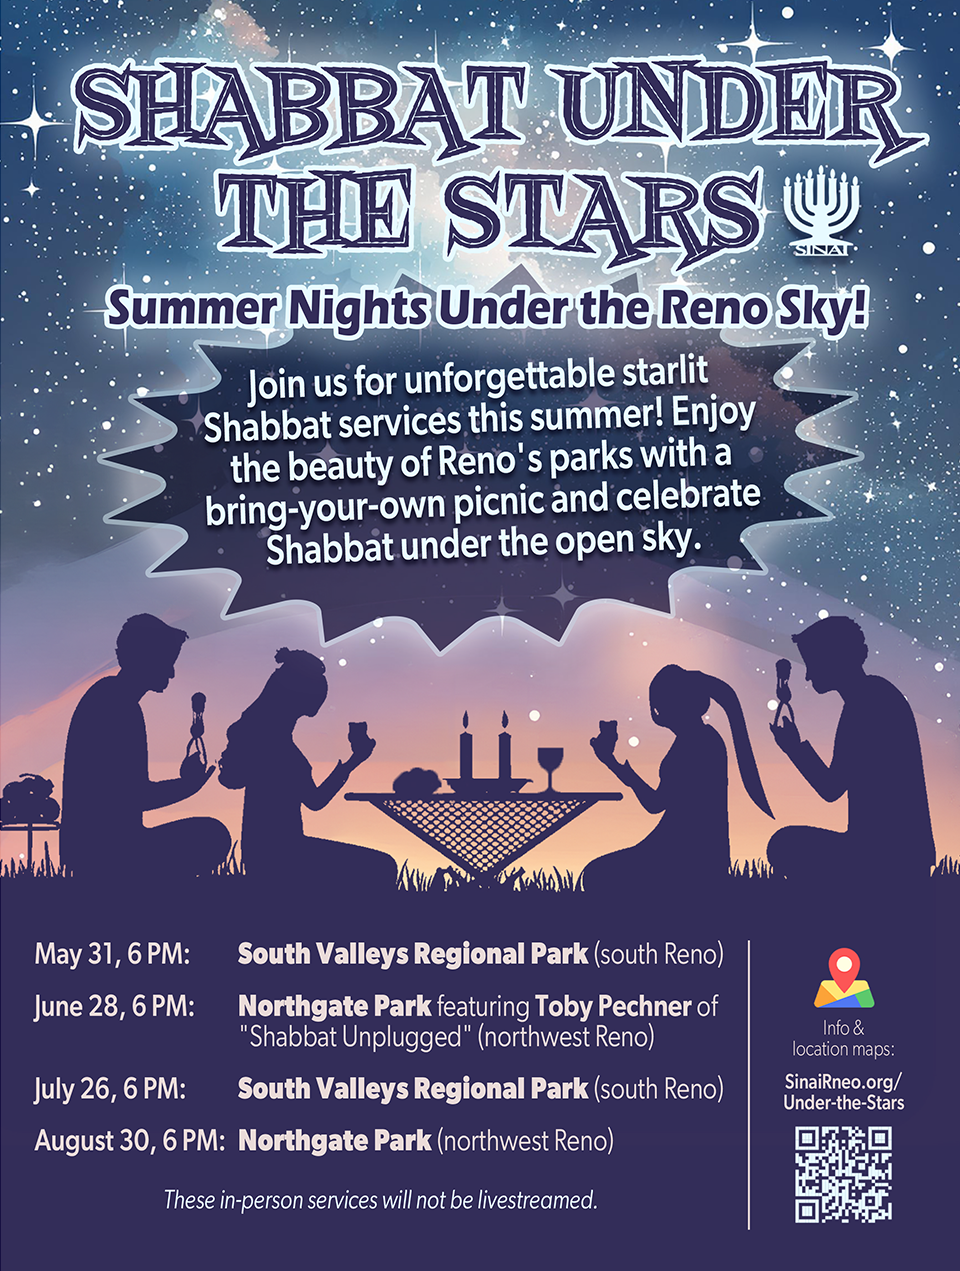 Shabbat Under the Stars: Summer Nights Under the Reno Sky! Join us for unforgettable starlit Shabbat services this summer! Enjoy the beauty of Reno's parks with a bring-your-own picnic and celebrate Shabbat under the open sky. May 31, 6 PM: South Valleys Regional Park (south Reno). June 28, 6 PM: Northgate Park featuring Toby Pechner of "Shabbat Unplugged" (northwest Reno). July 26, 6 PM: South Valleys Regional Park (south Reno). August 30, 6 PM: Northgate Park (northwest Reno). These in-person services will not be livestreamed.